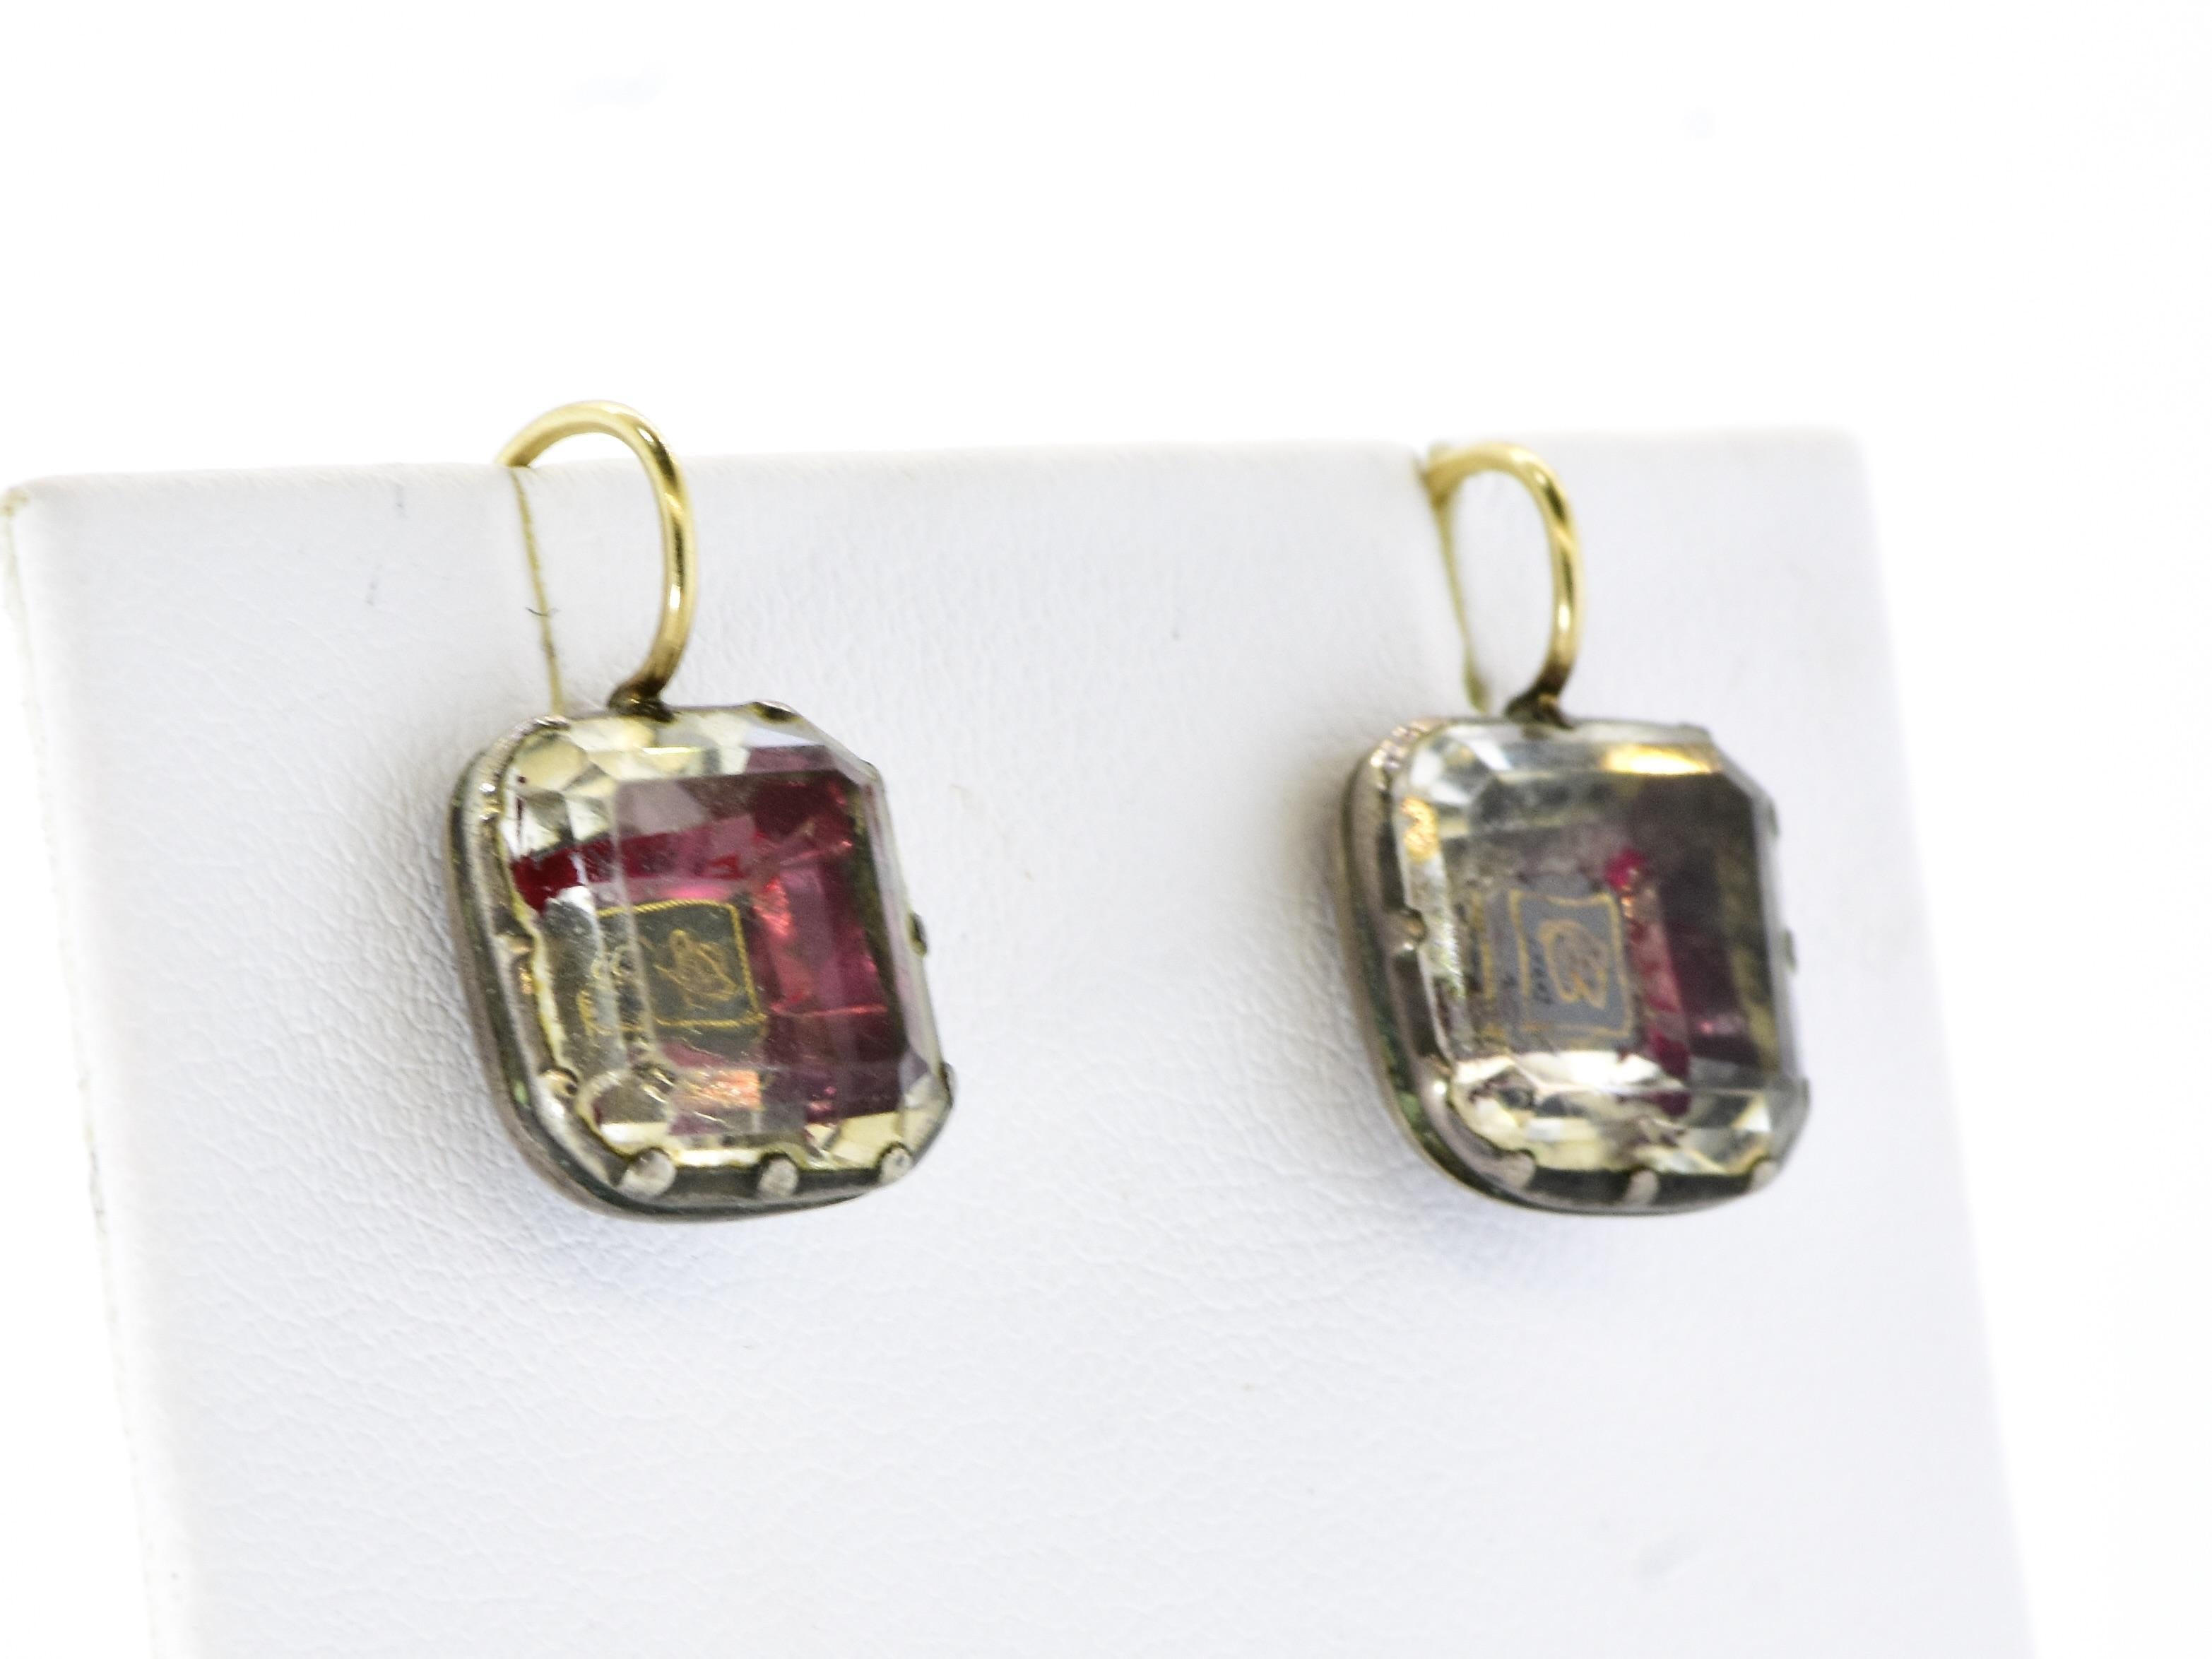 Men's Antique Stuart Crystal Silver and Gold Earrings, Georgian, c. 1650. For Sale